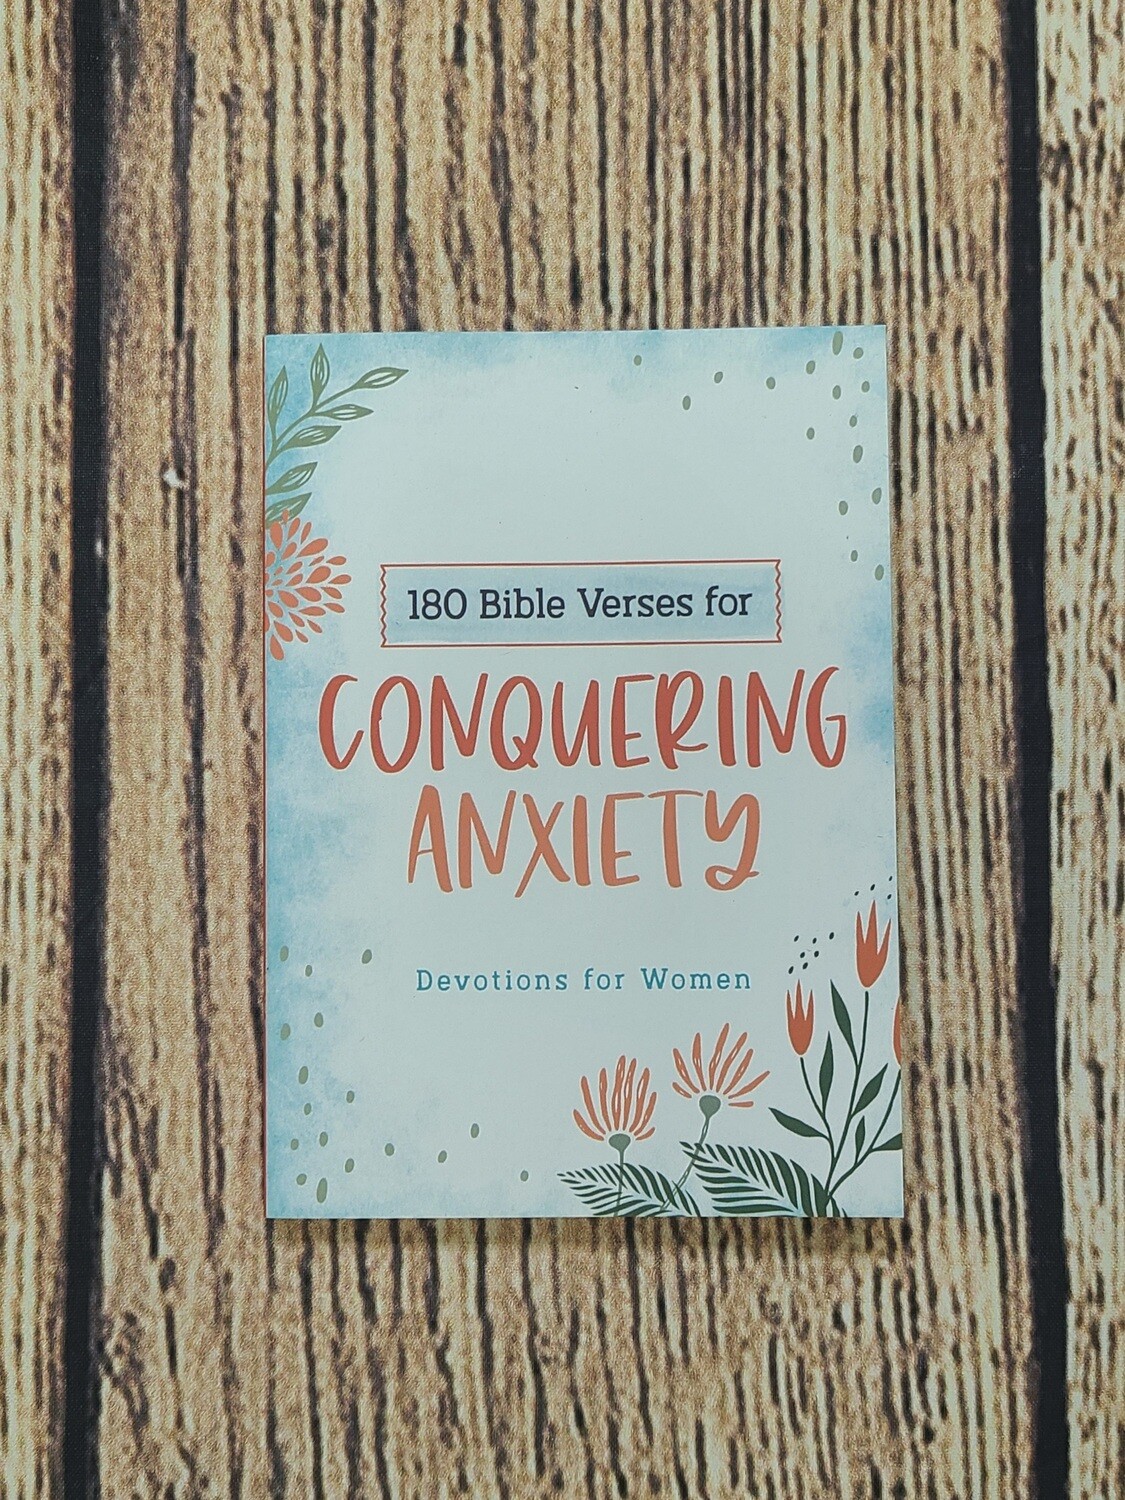 180 Bible Verses for Conquering Anxiety: Devotions for Women by Carey Scott